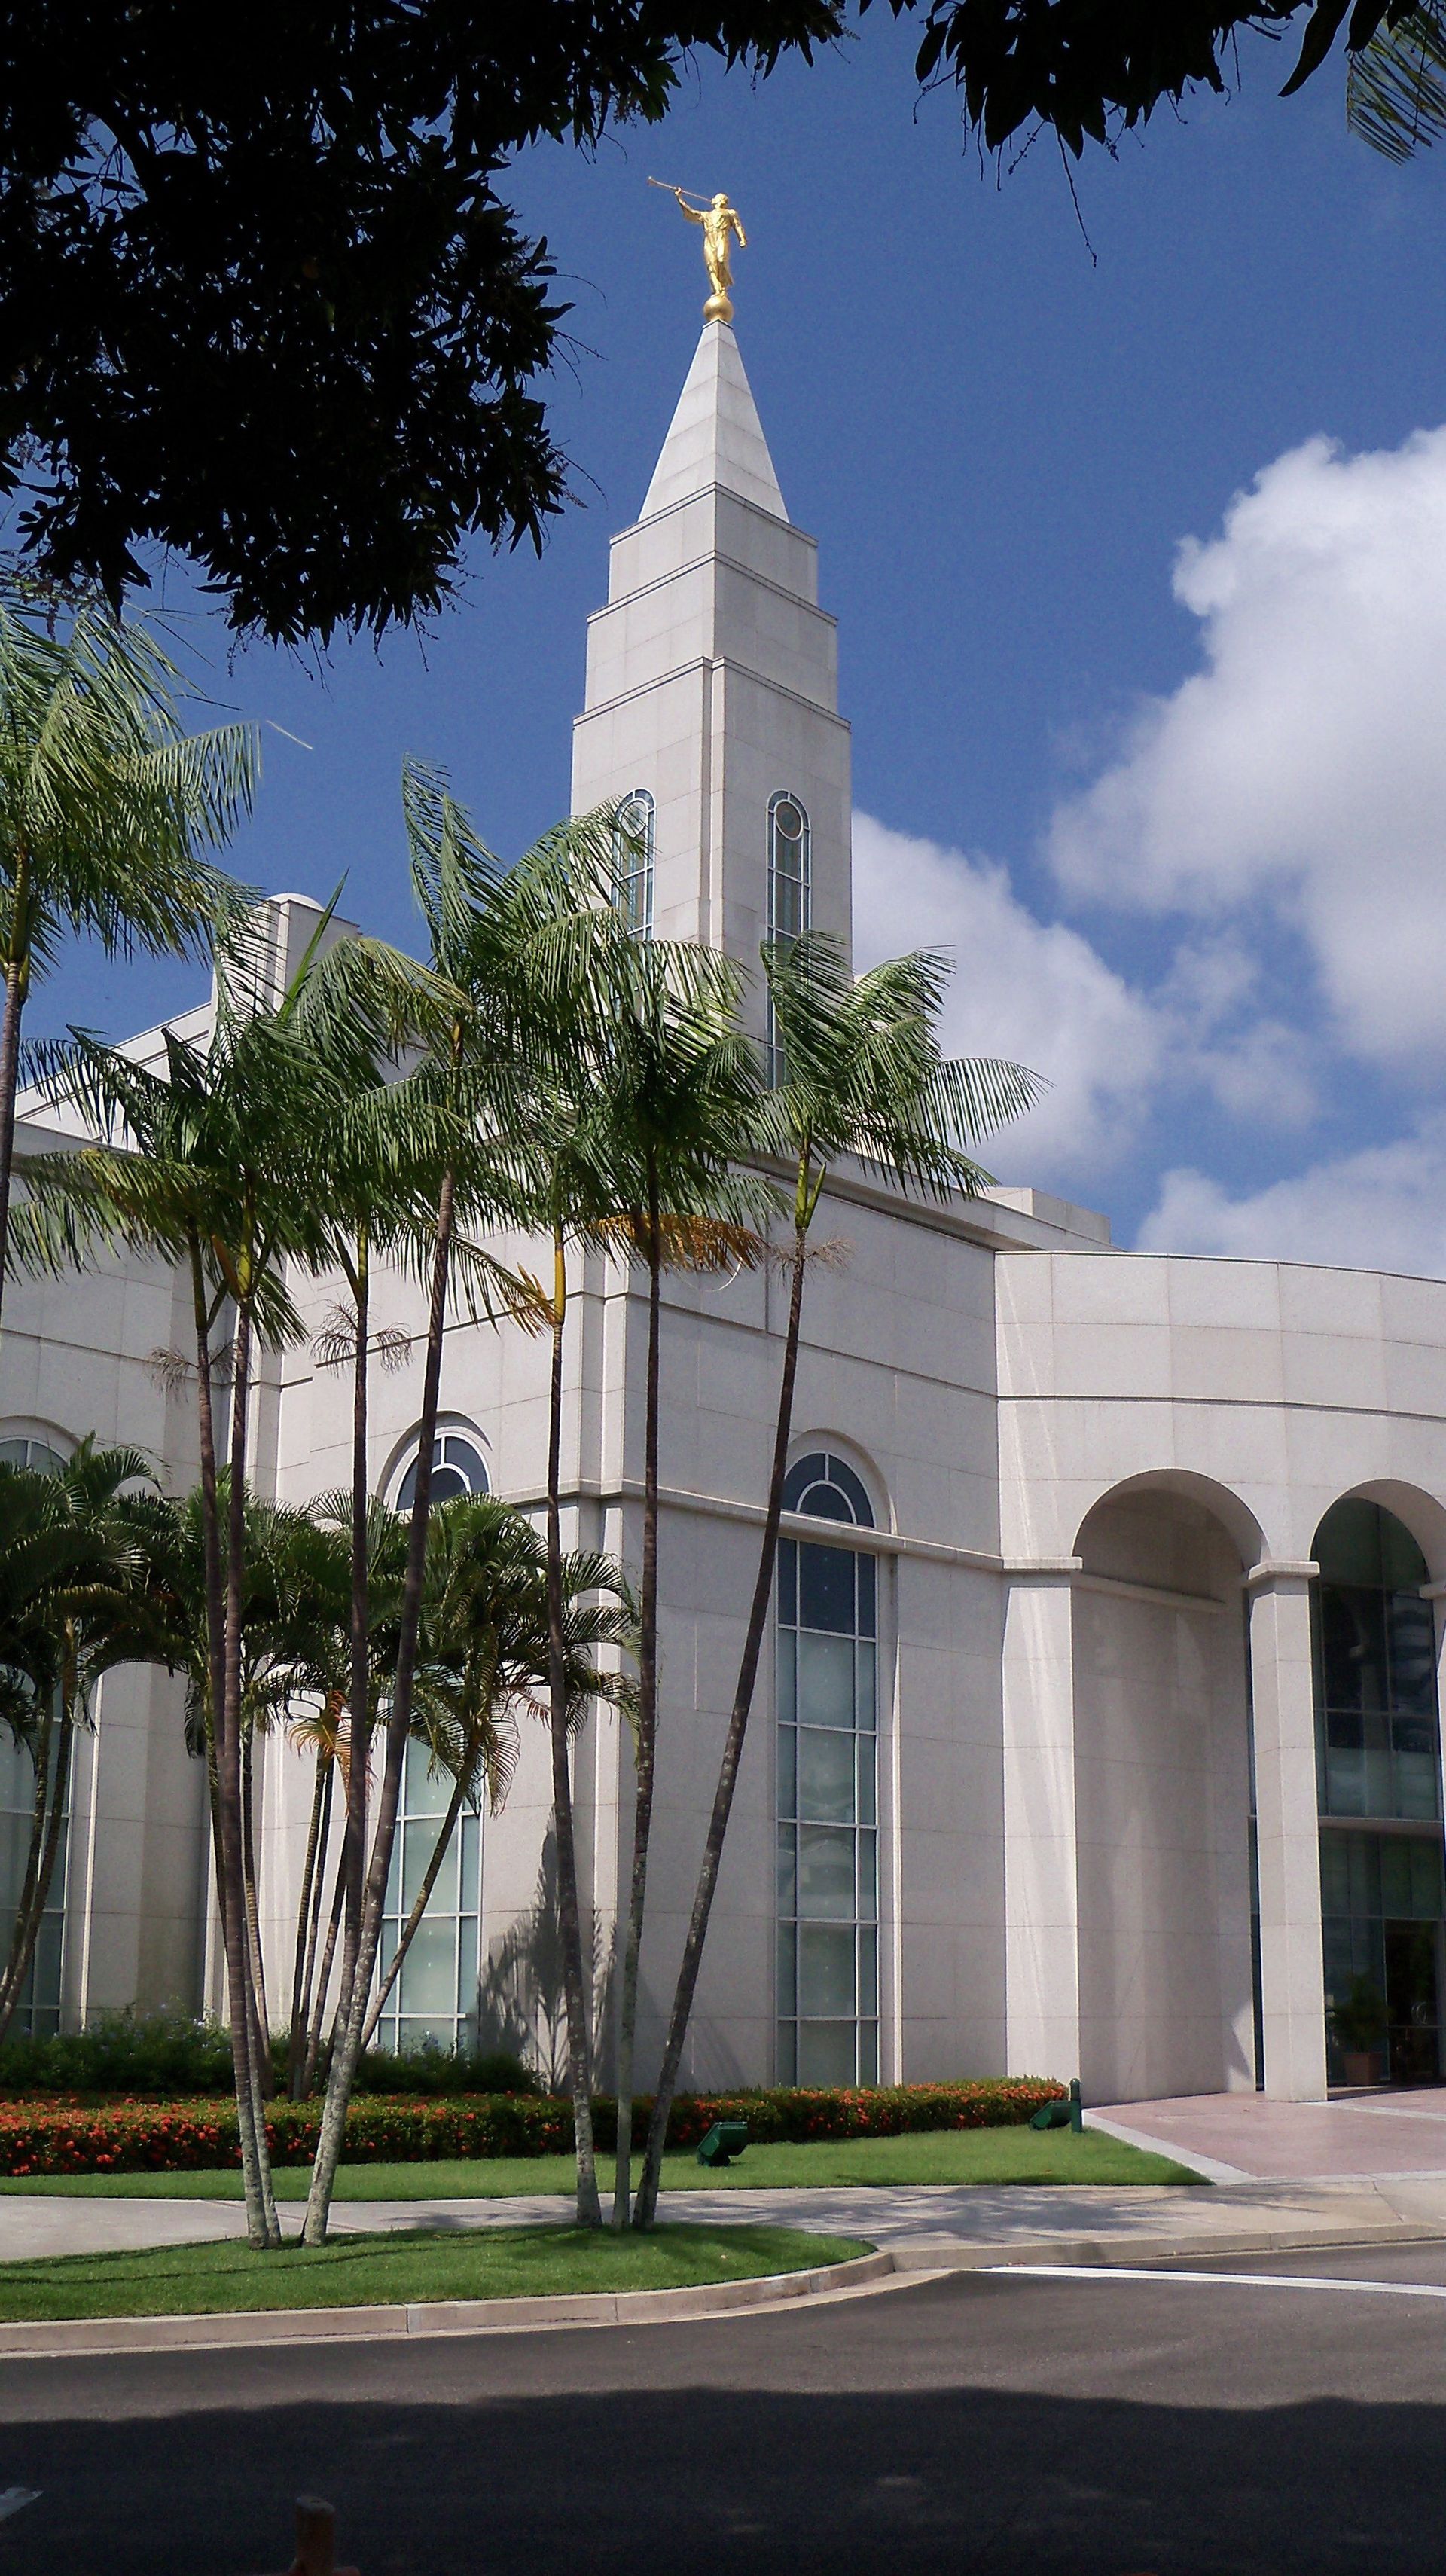 The Recife Brazil Temple side view, including the entrance and scenery.